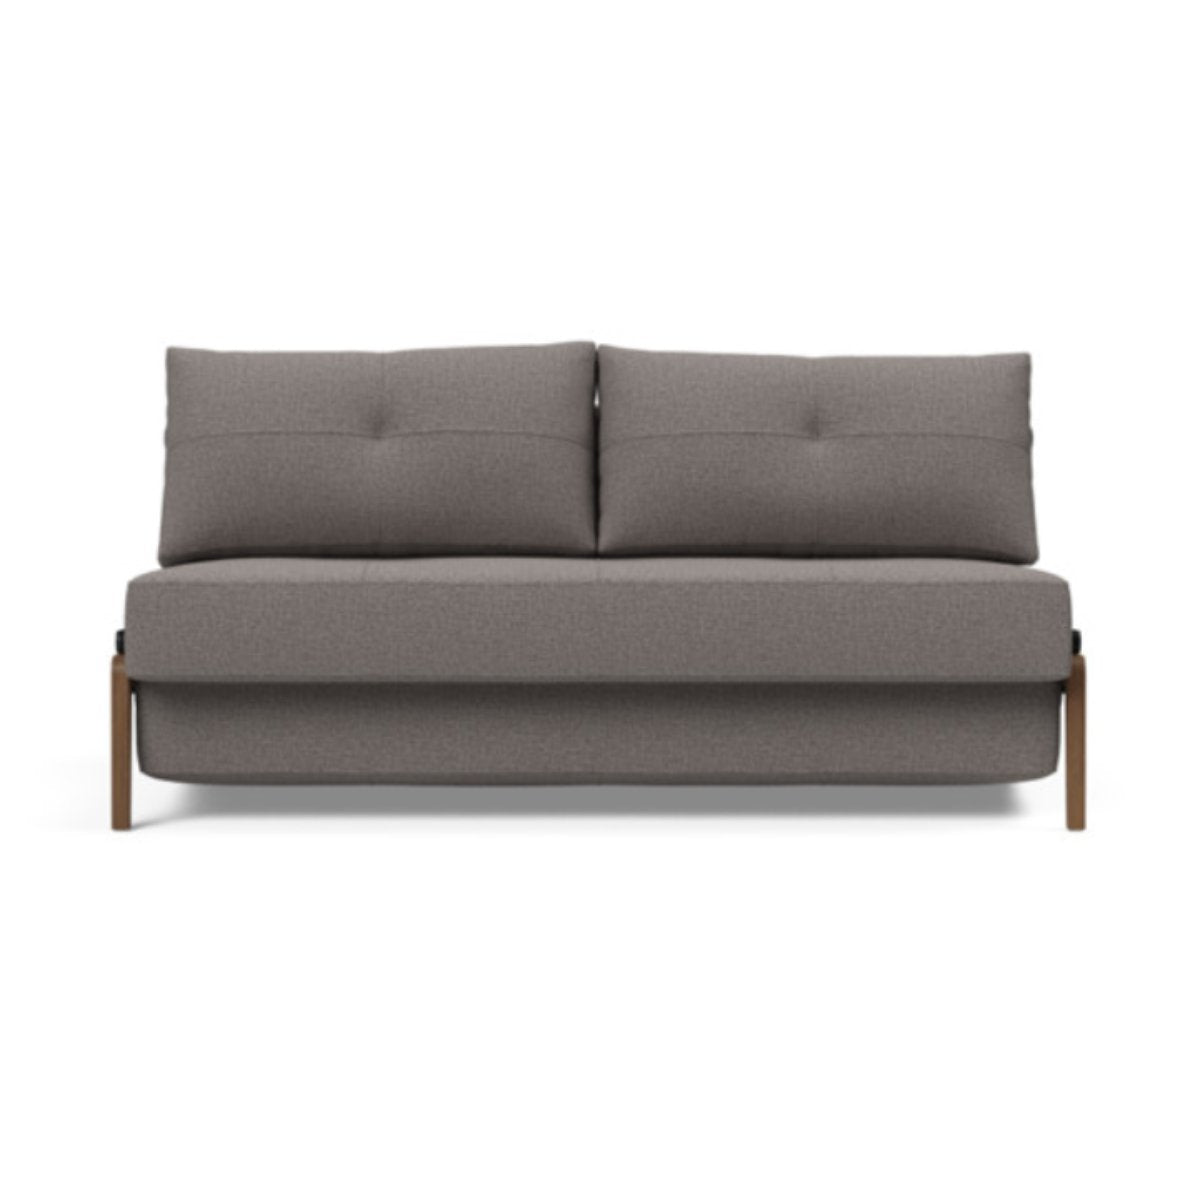 Load image into Gallery viewer, Cubed Queen Size Sofa Bed With Dark Wood Legs 521 Mixed Dance GreySofa Beds INNOVATION  521 Mixed Dance Grey   Four Hands, Burke Decor, Mid Century Modern Furniture, Old Bones Furniture Company, Old Bones Co, Modern Mid Century, Designer Furniture, https://www.oldbonesco.com/
